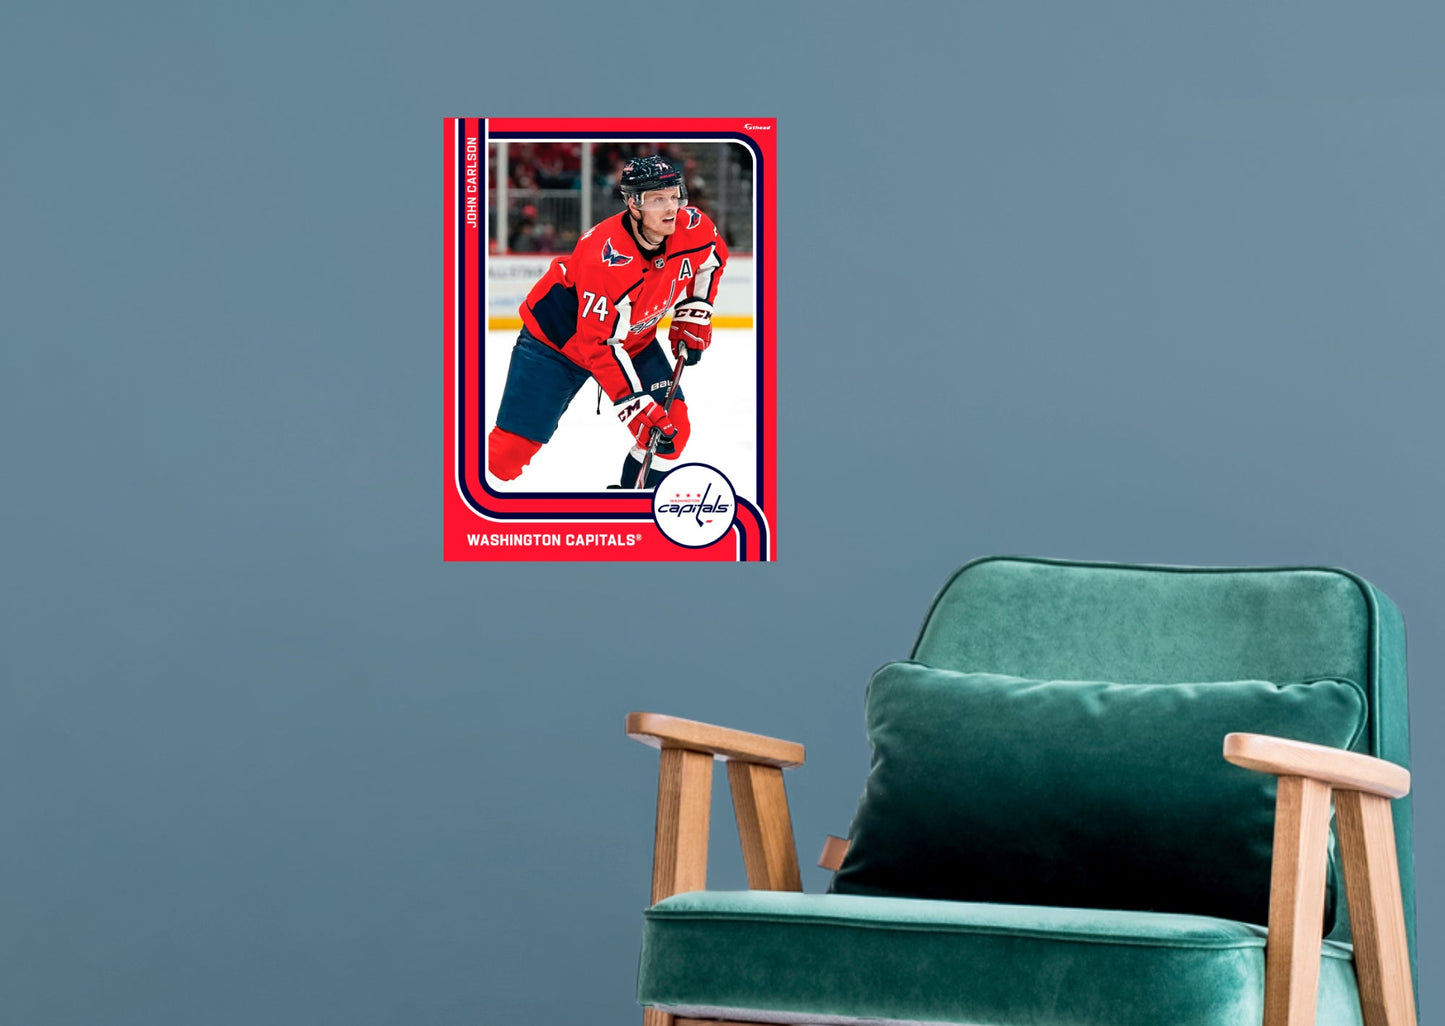 Washington Capitals: John Carlson Poster - Officially Licensed NHL Removable Adhesive Decal